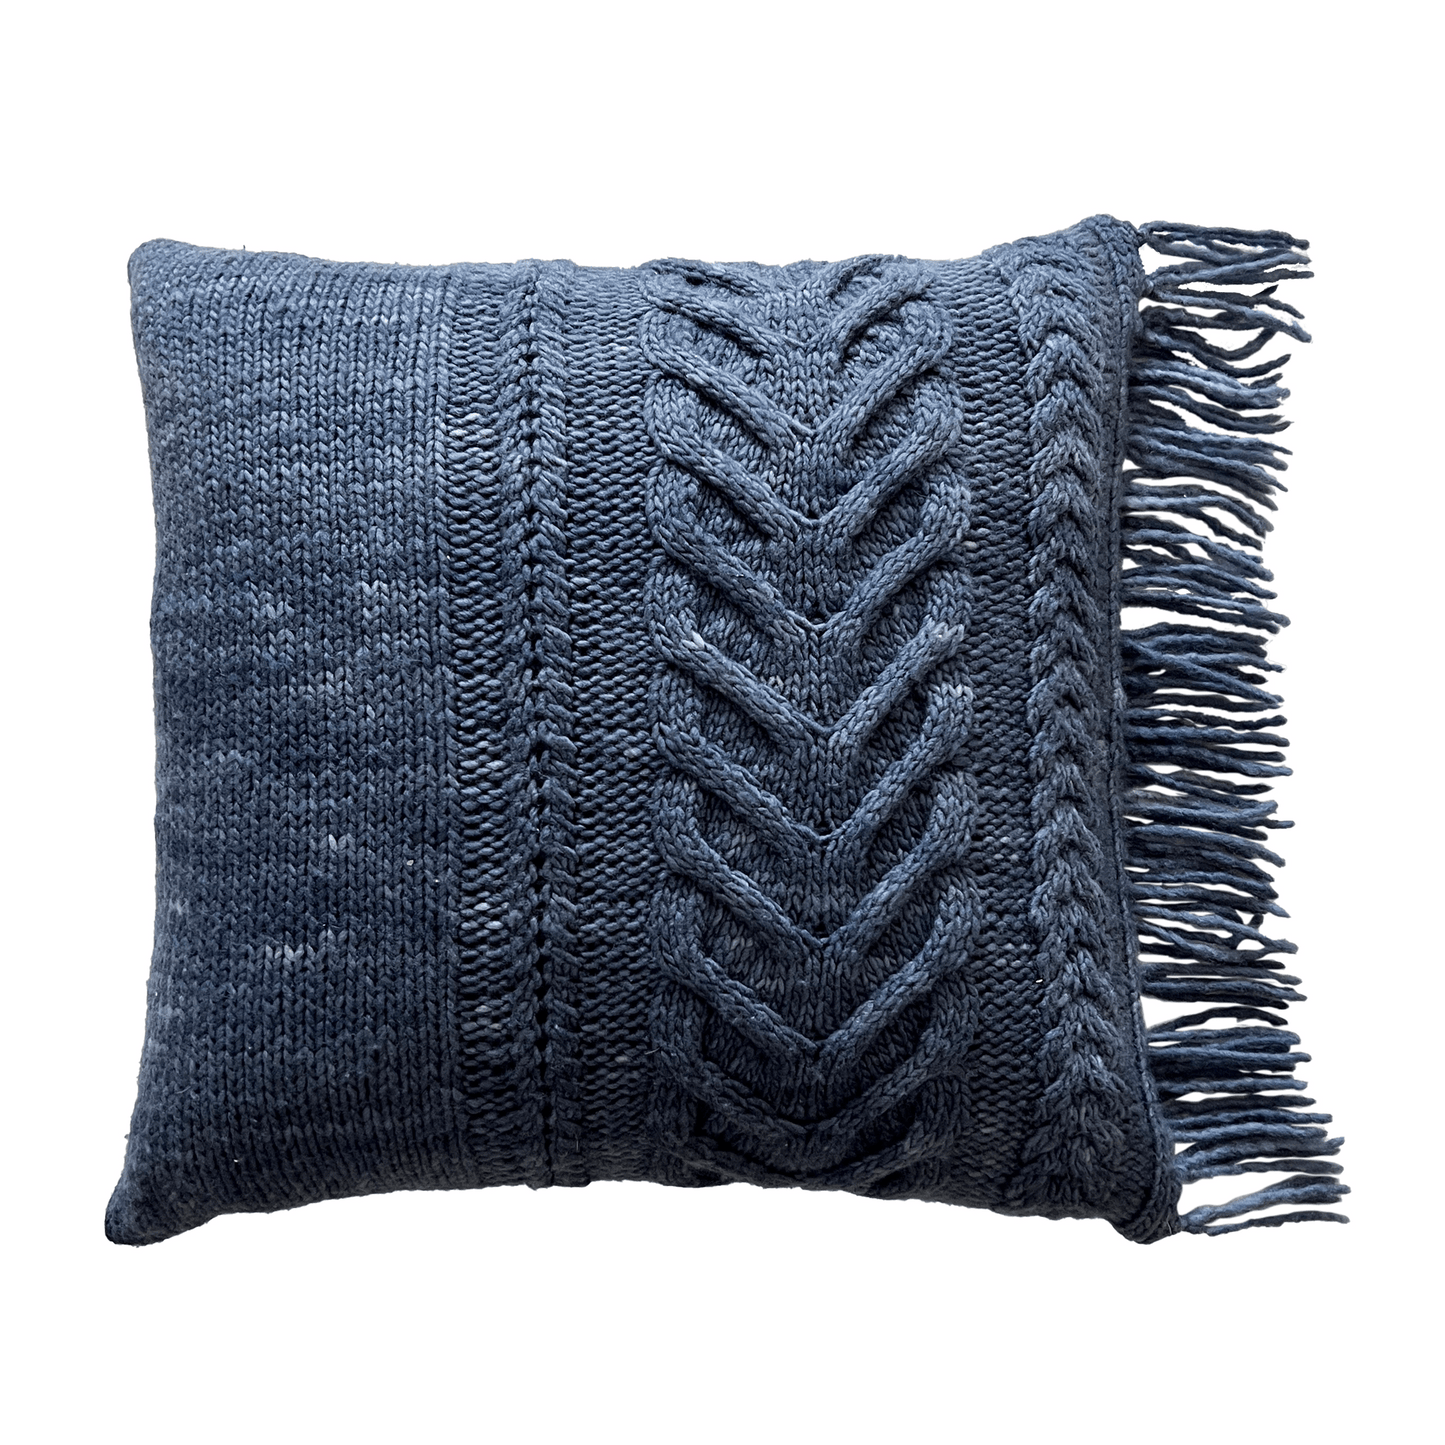 Knit in Manos del Uruguay's 100% merino Maxima yarn, this staghorn cabled pillow is super soft to touch!